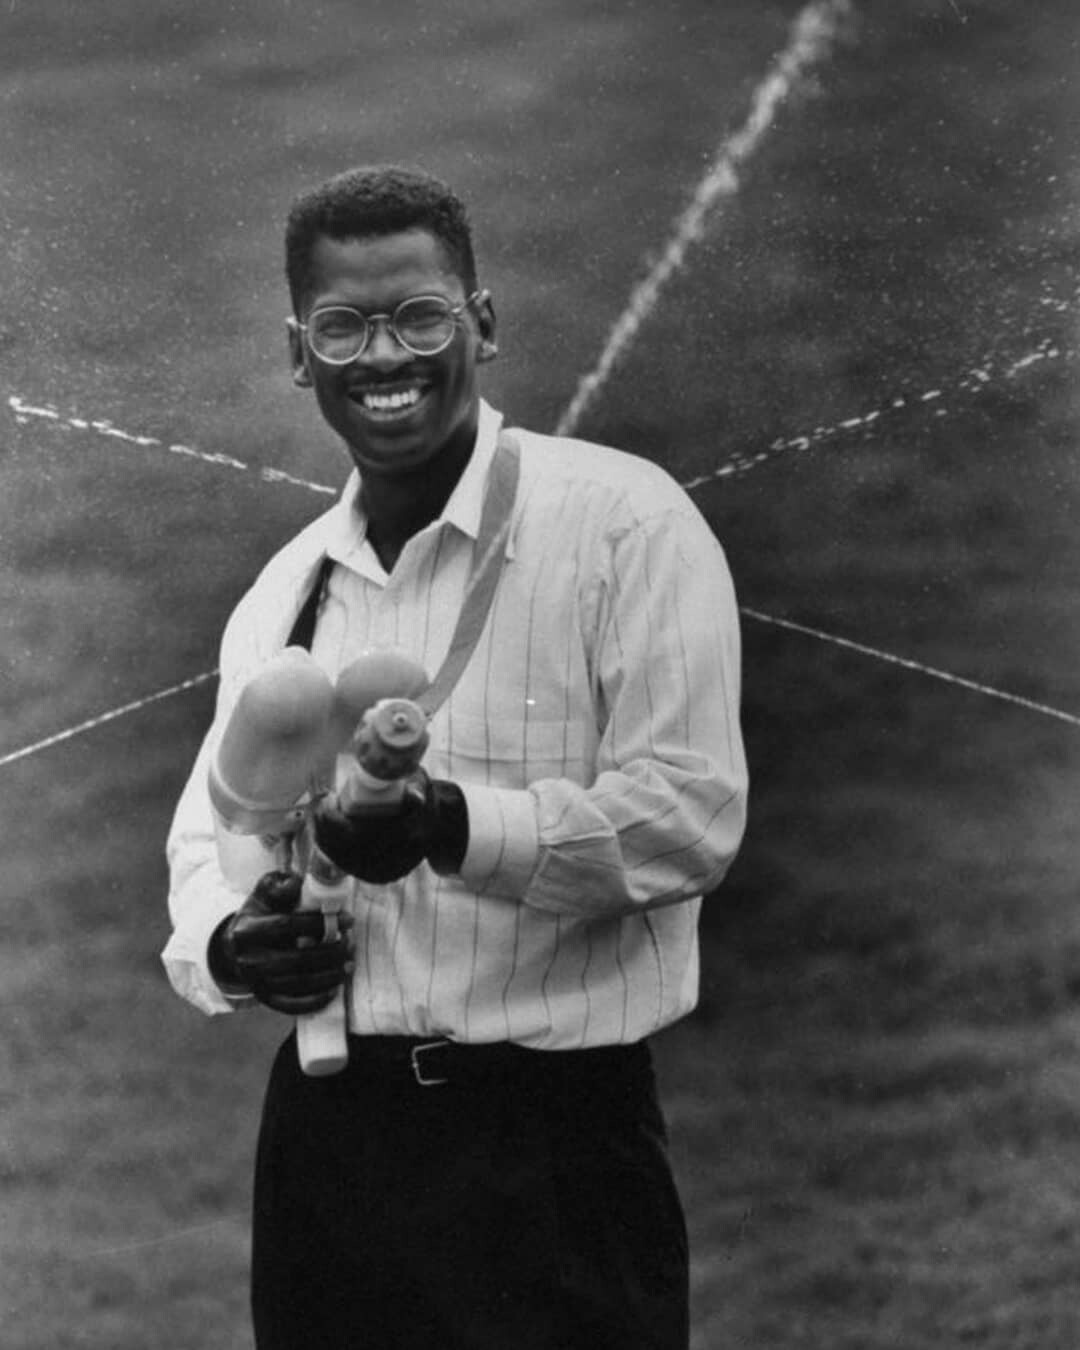 Lonnie Johnson, inventor of the water gun, 1992 - Inventions, Inventors, Water gun, The photo, Old photo, Thank you, Childhood